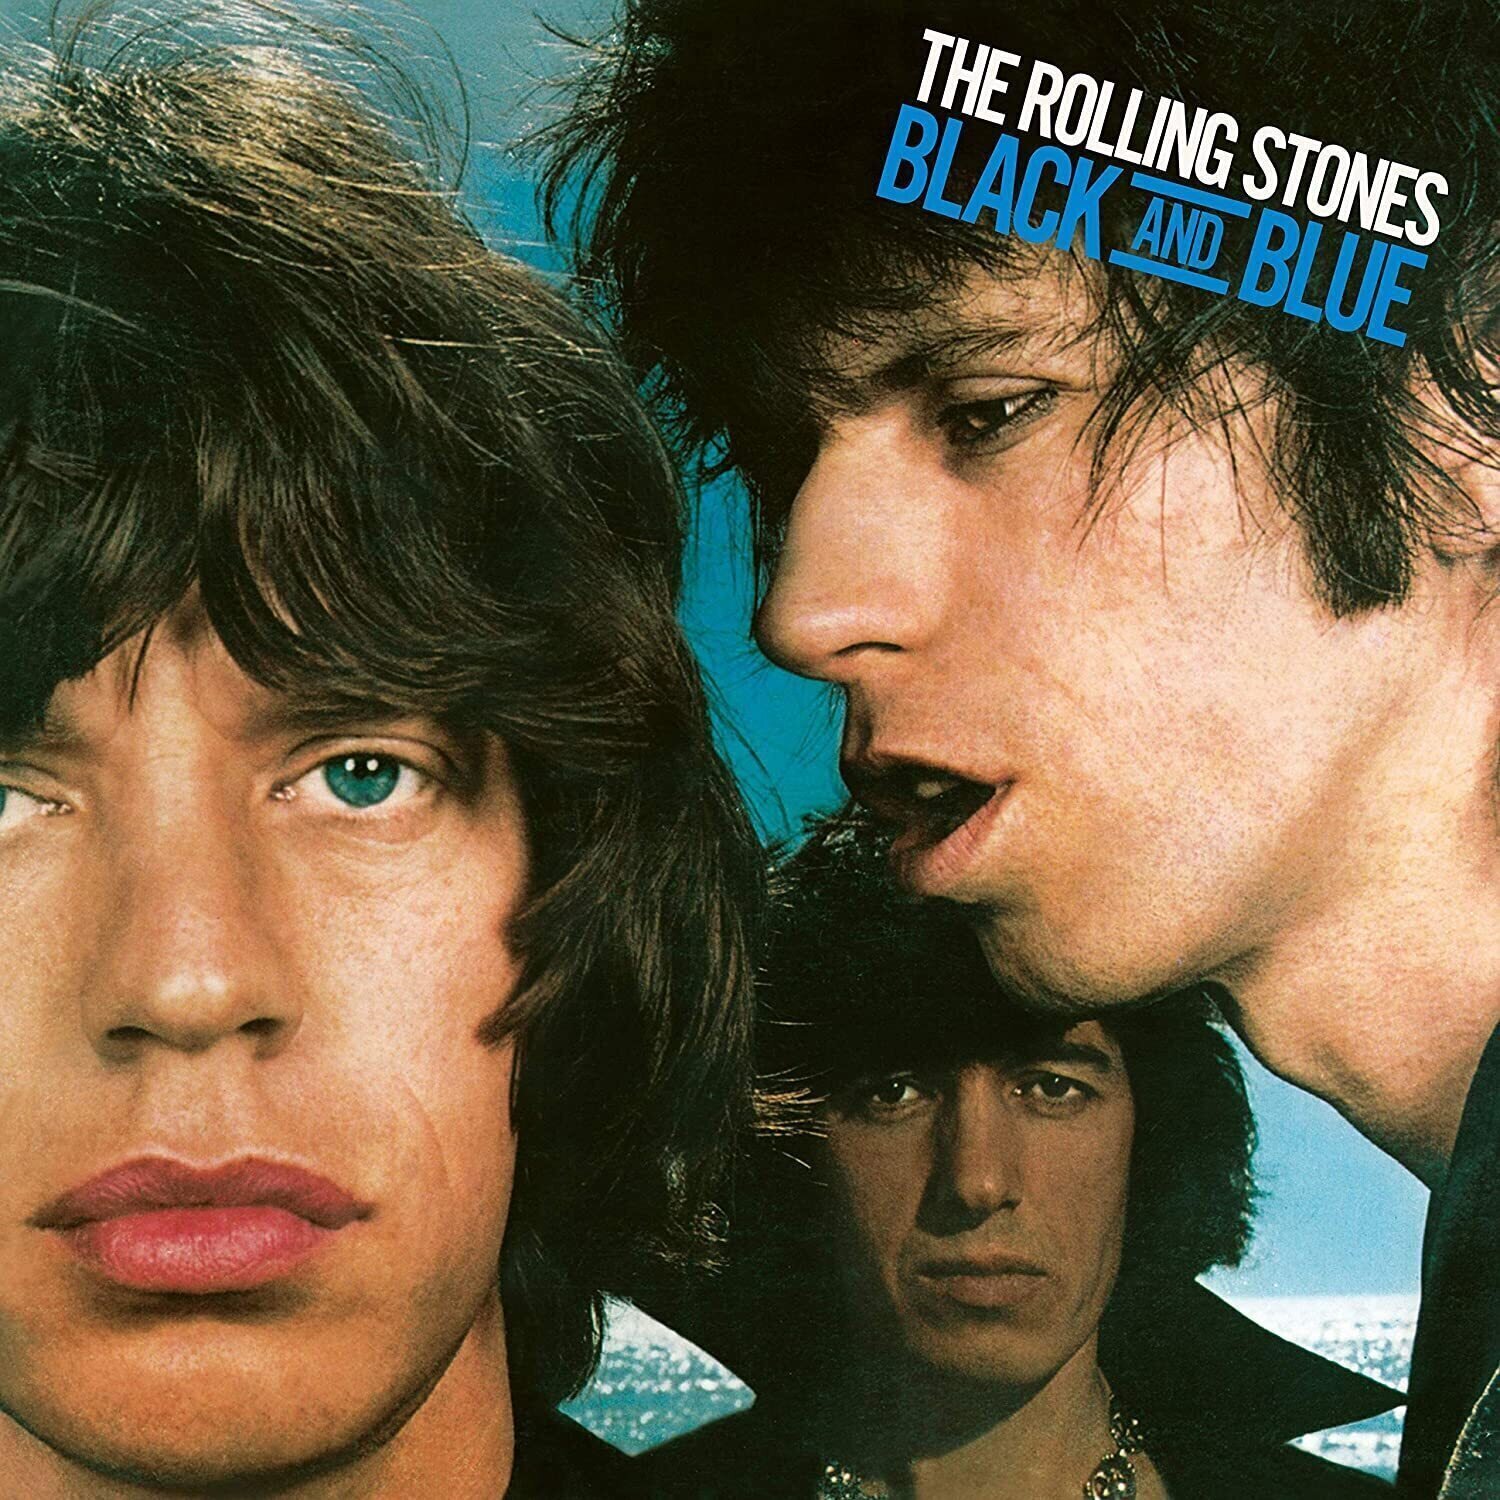 The Rolling Stones - Black And Blue (Half Speed Vinyl) (LP) The Rolling Stones